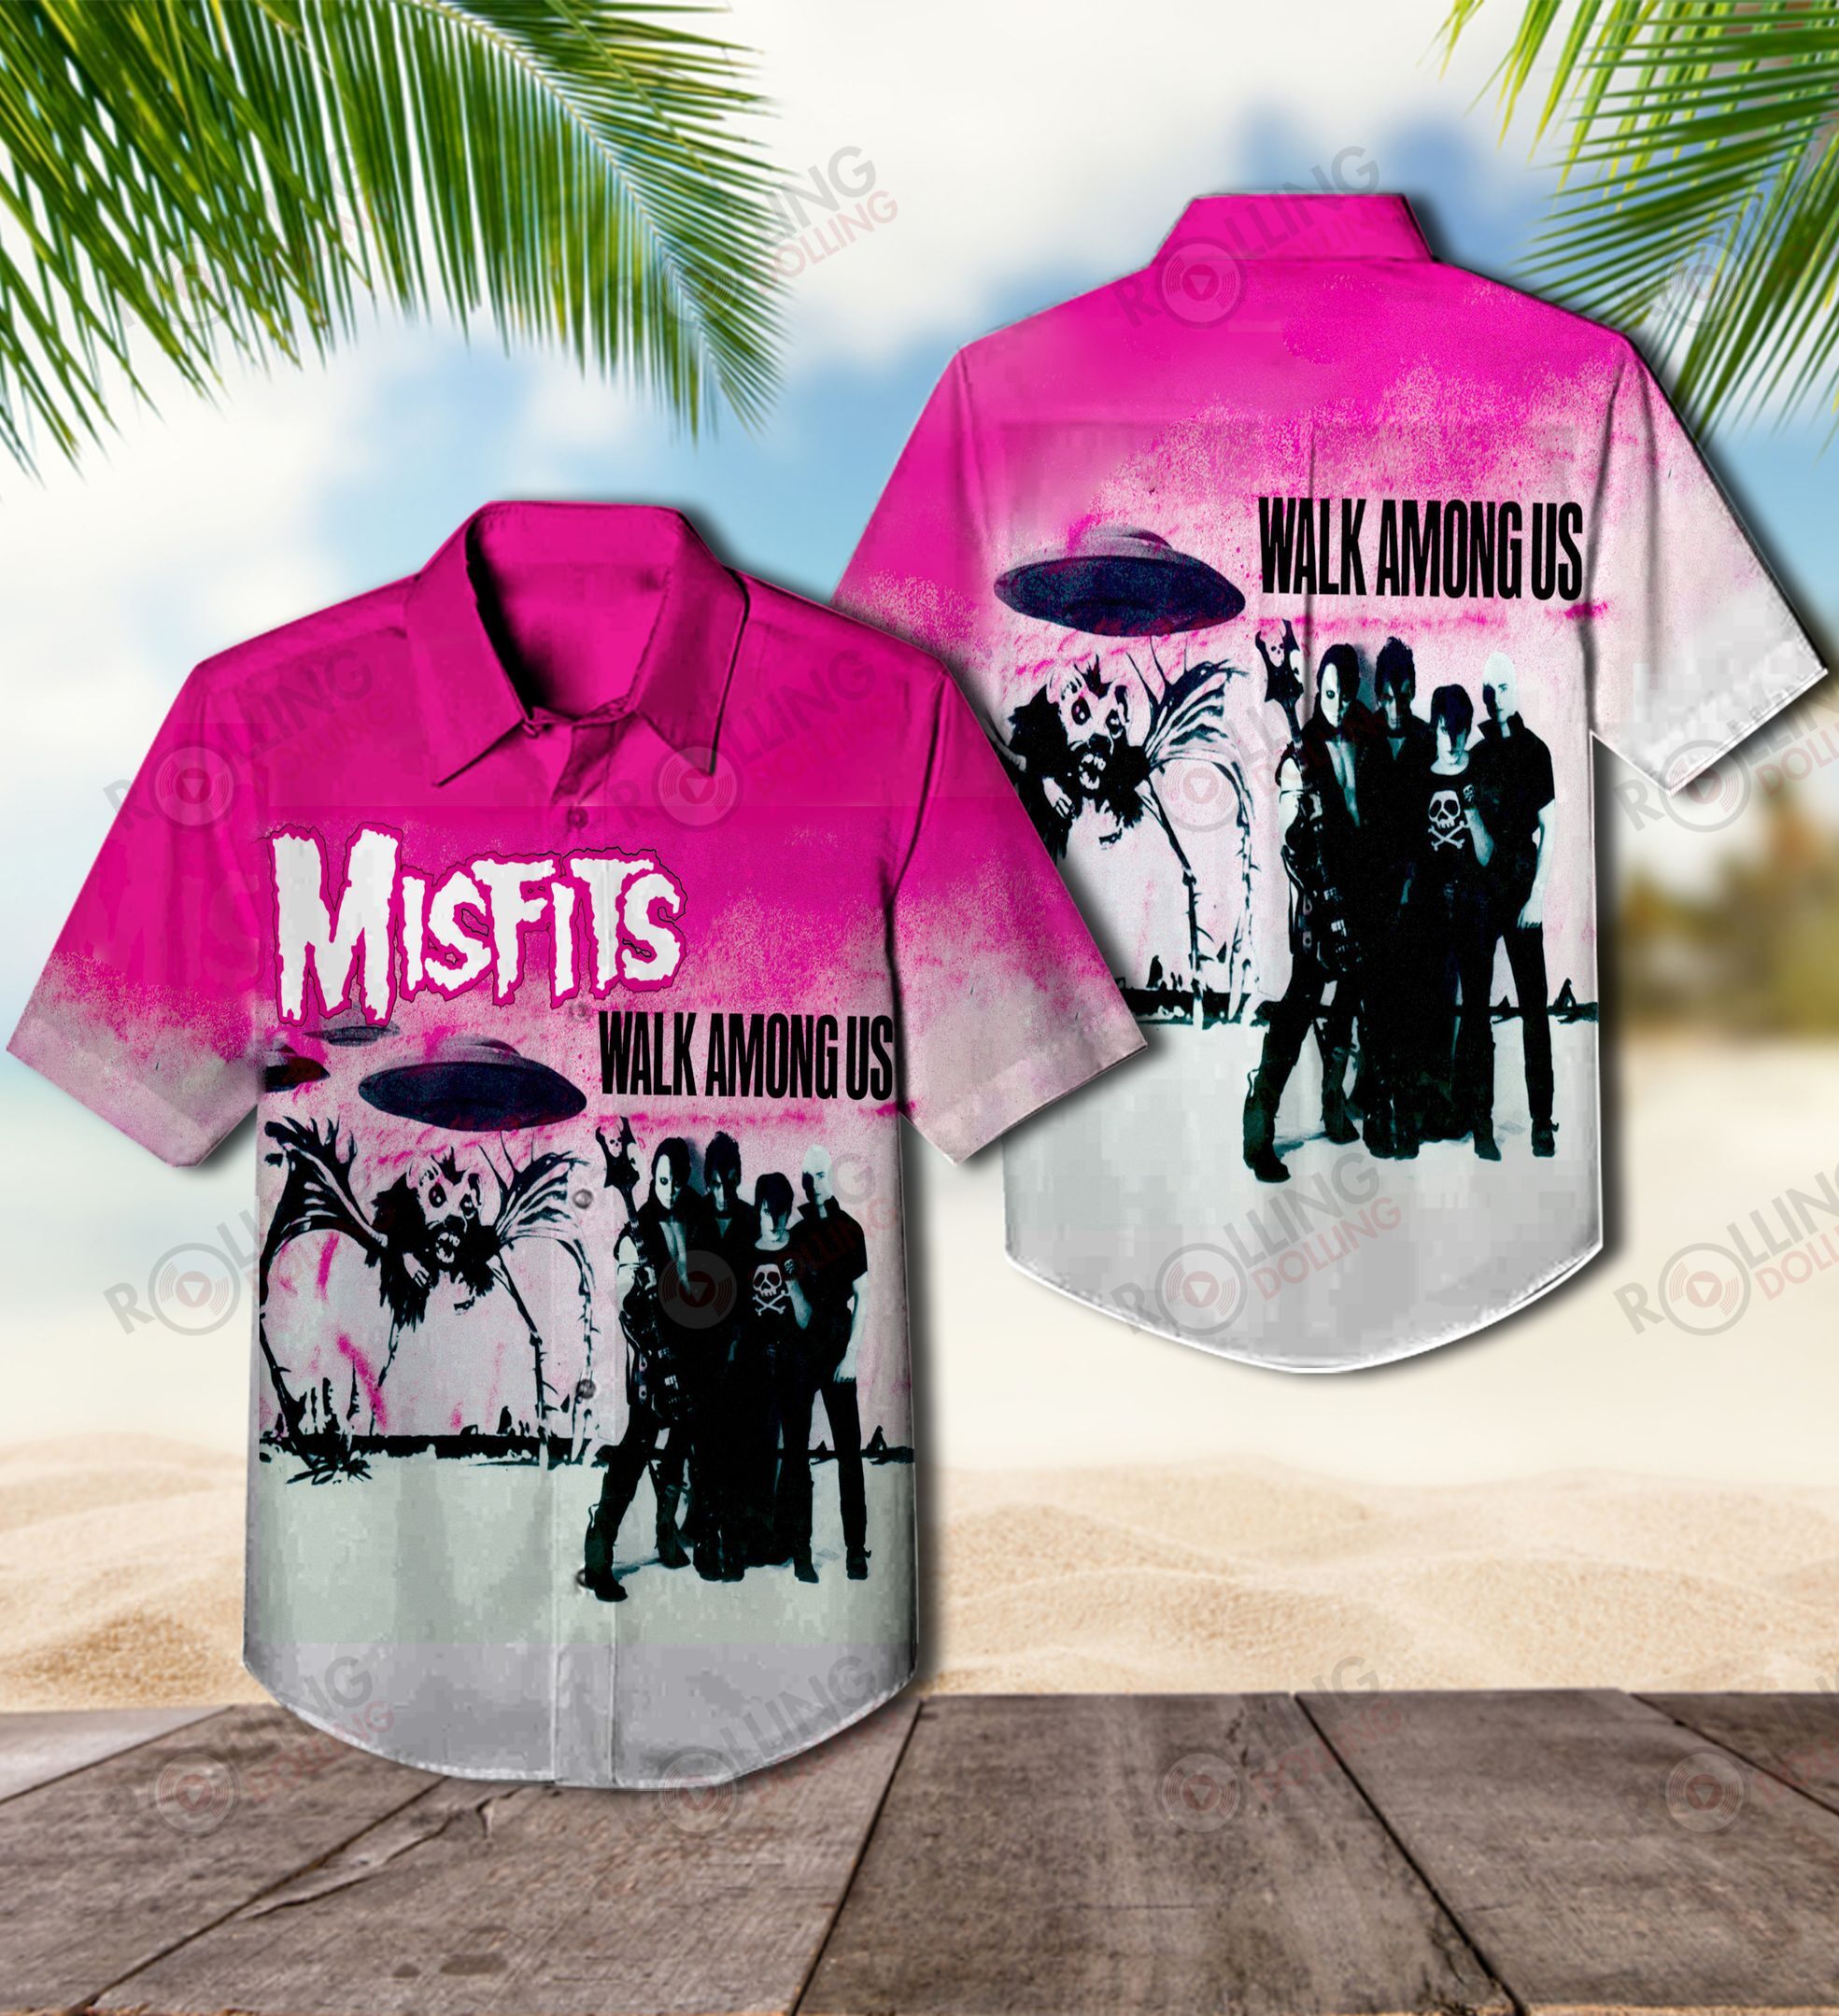 This would make a great gift for any fan who loves Hawaiian Shirt as well as Rock band 19